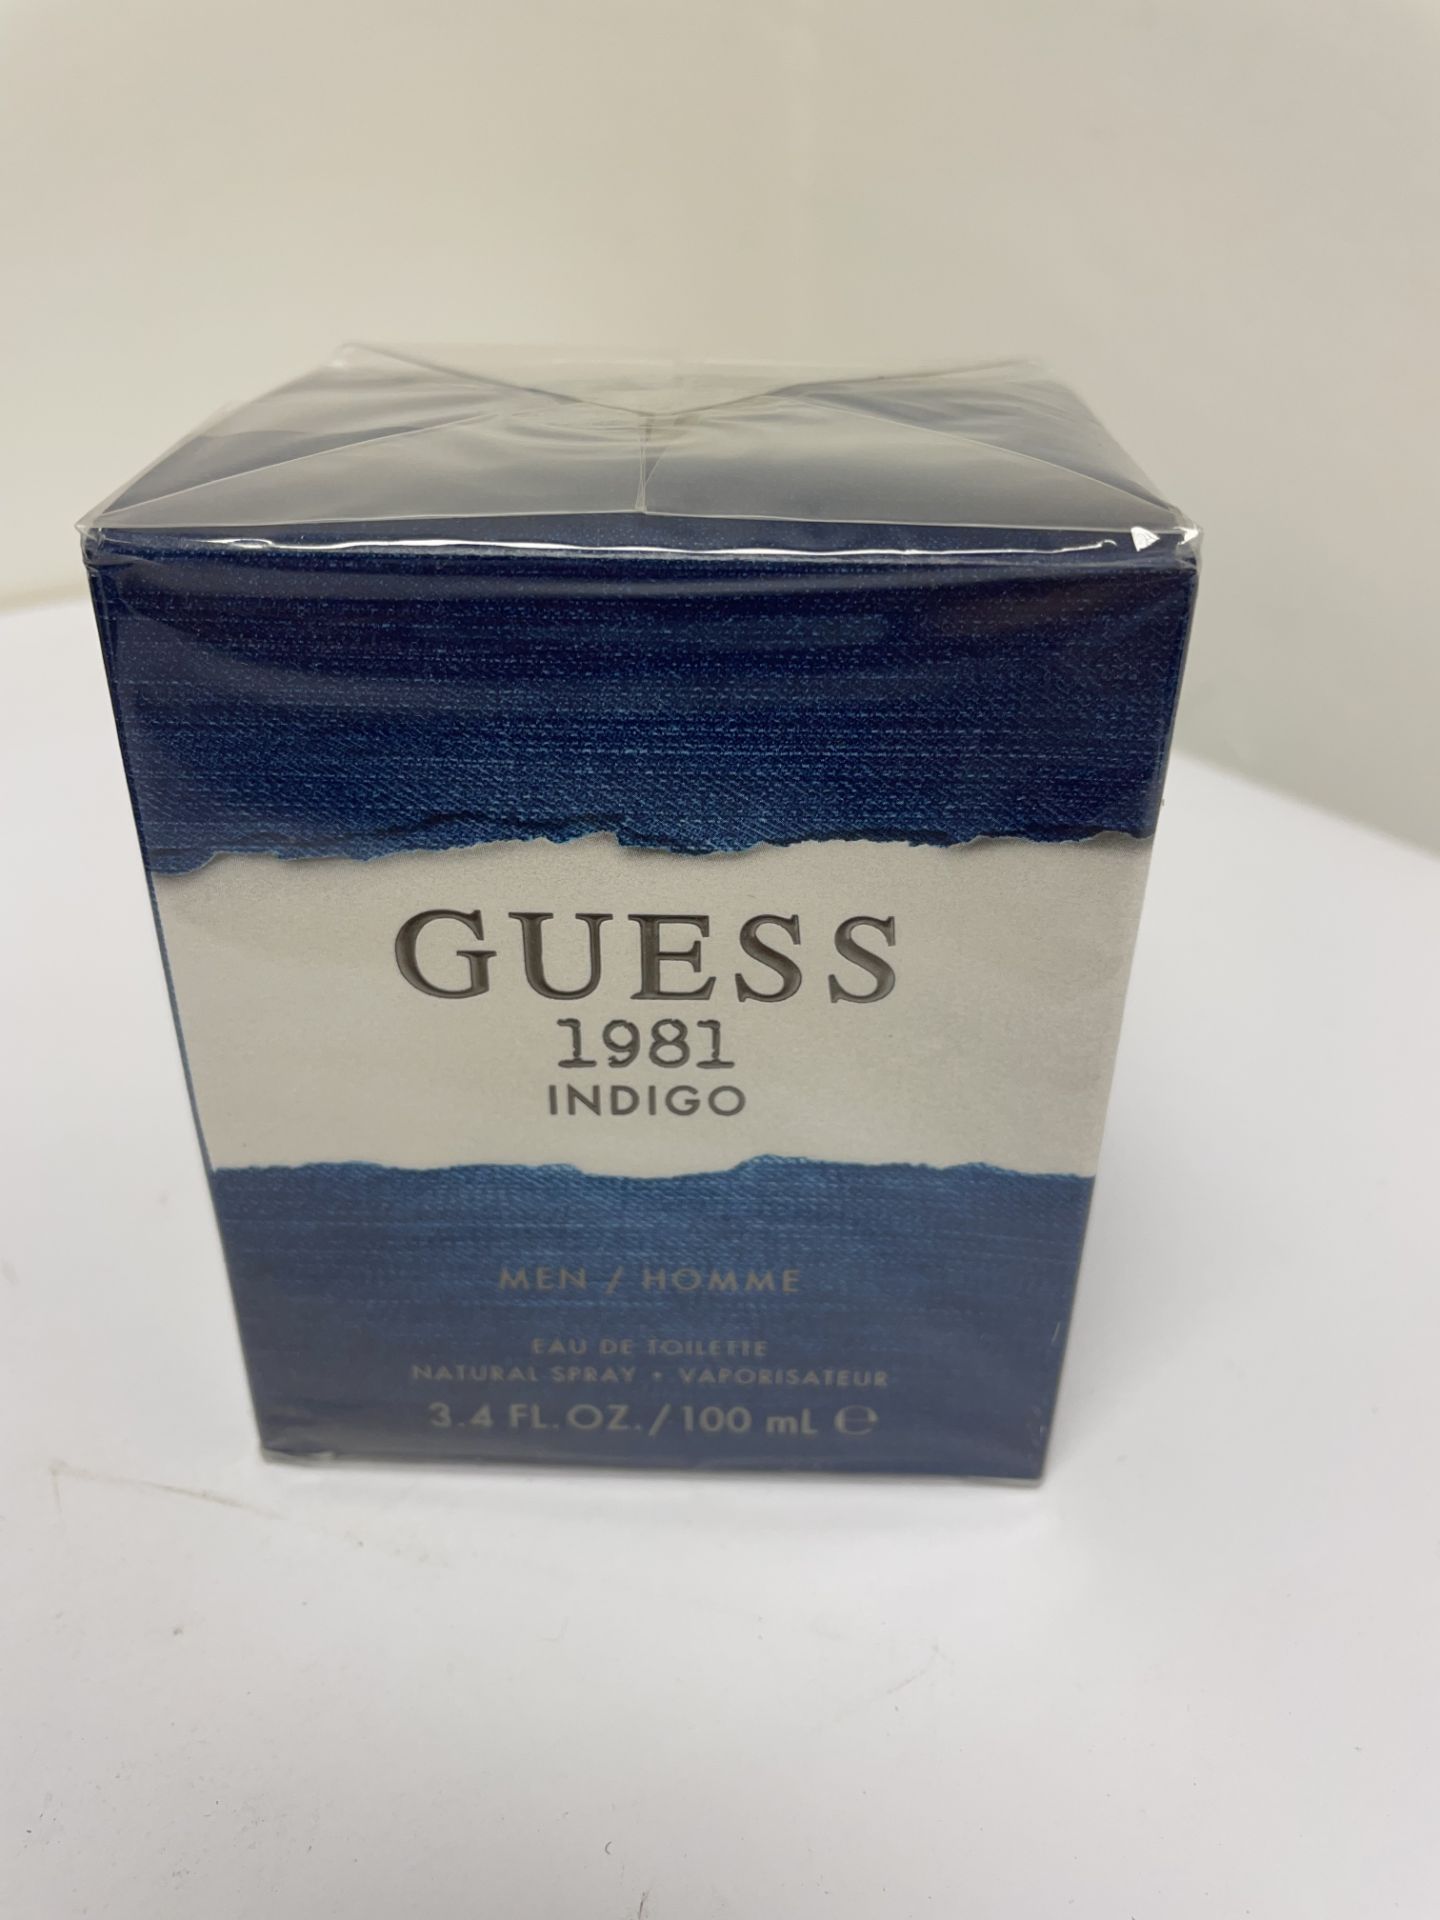 Guess '1981' Fragrances for Him and Her | See description - Image 3 of 3